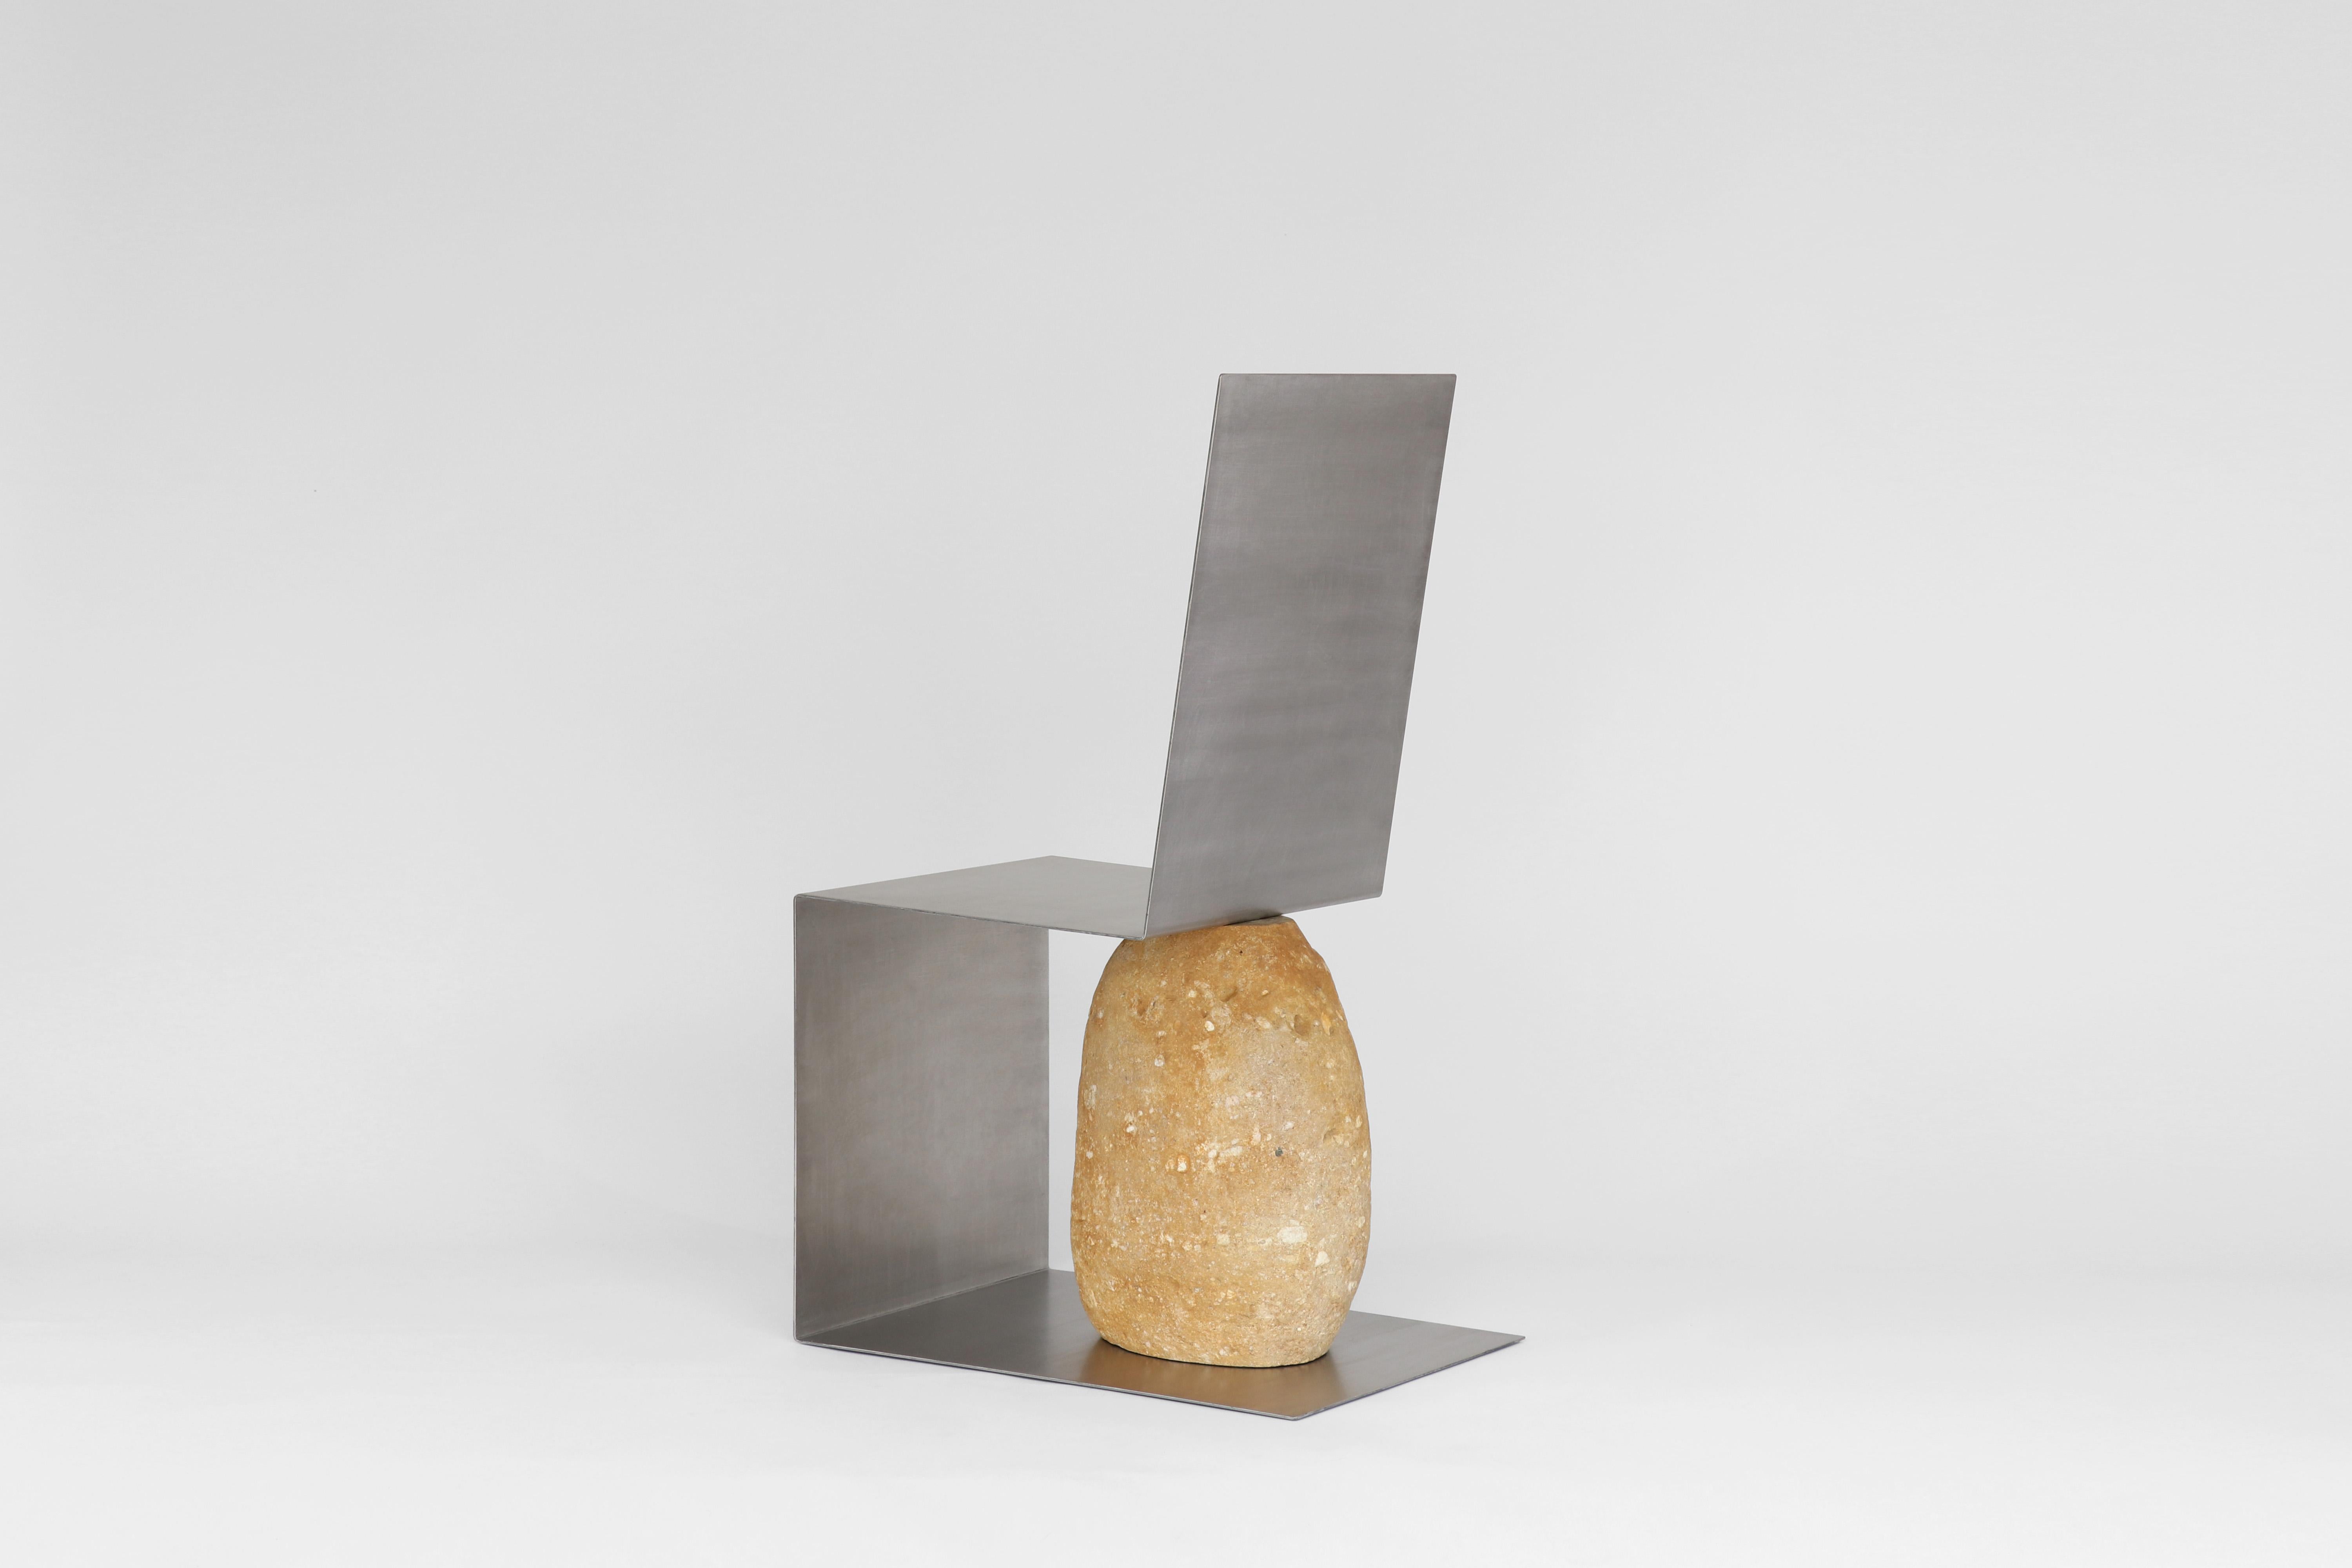 Contemporary Steel and Stone Chair by Batten and Kamp